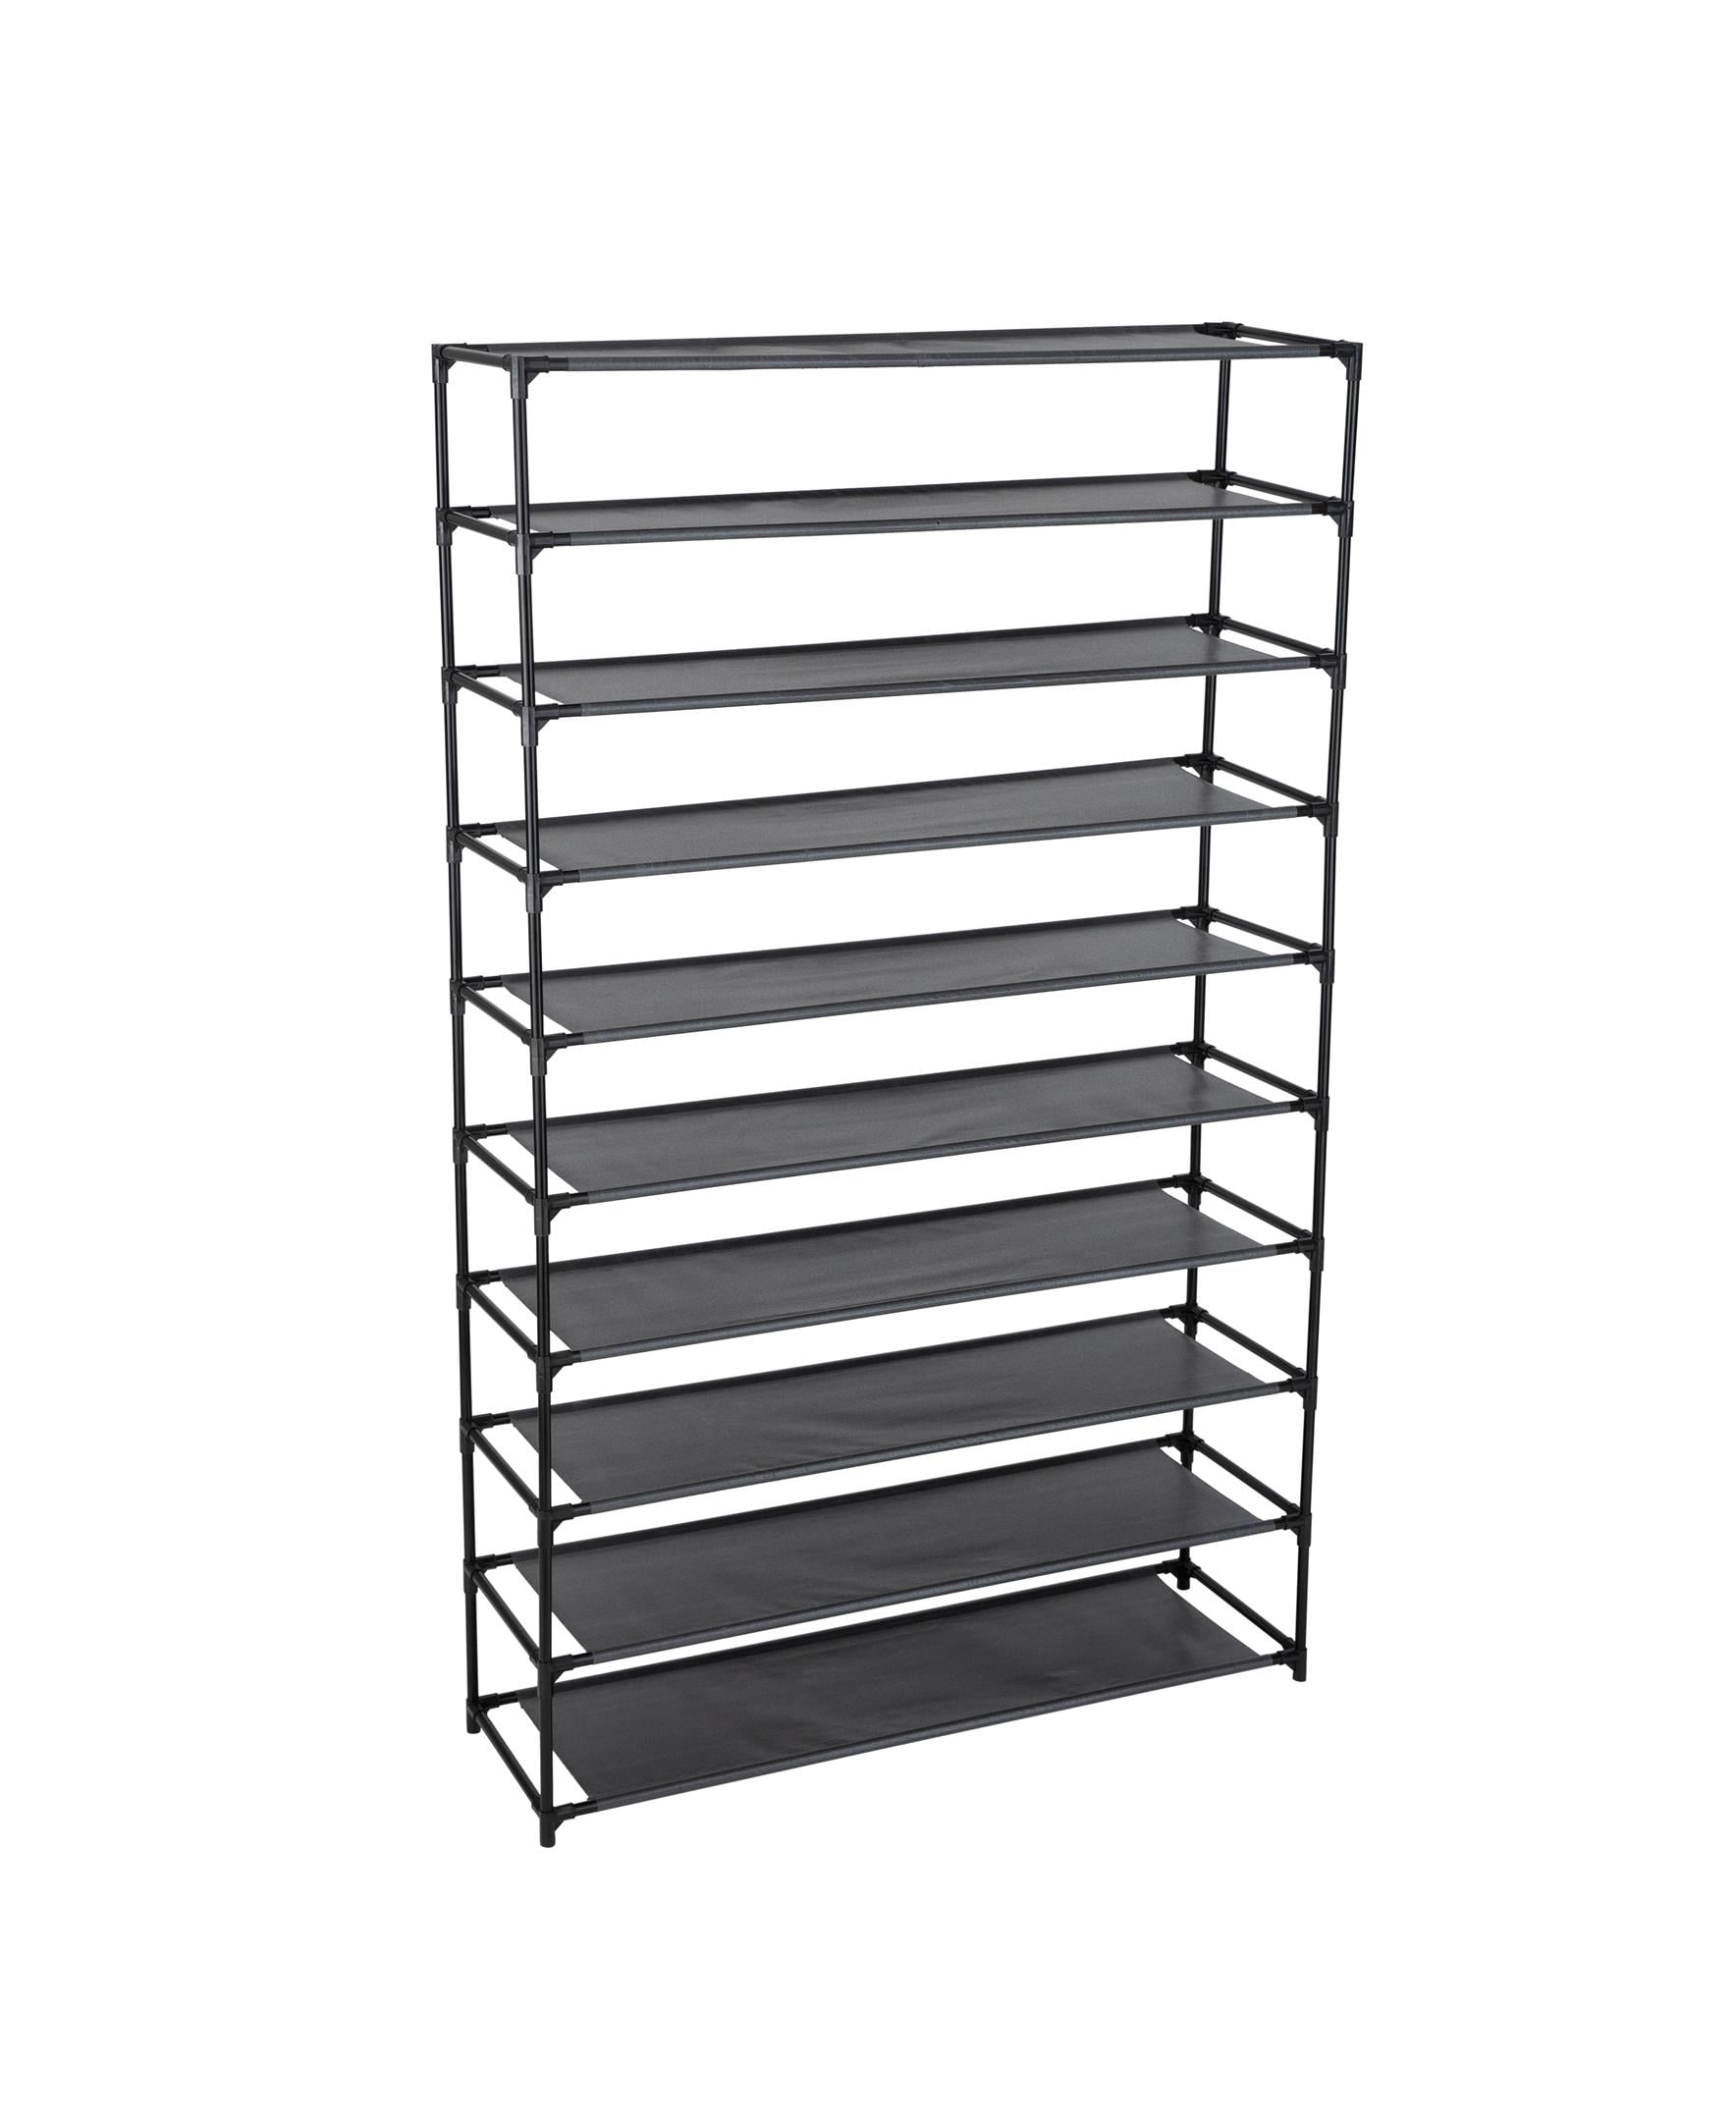 HOLDS 30 PAIRS. 10 Tier Tall Shoe Storage Rack Stainless Steel Metal Frame 